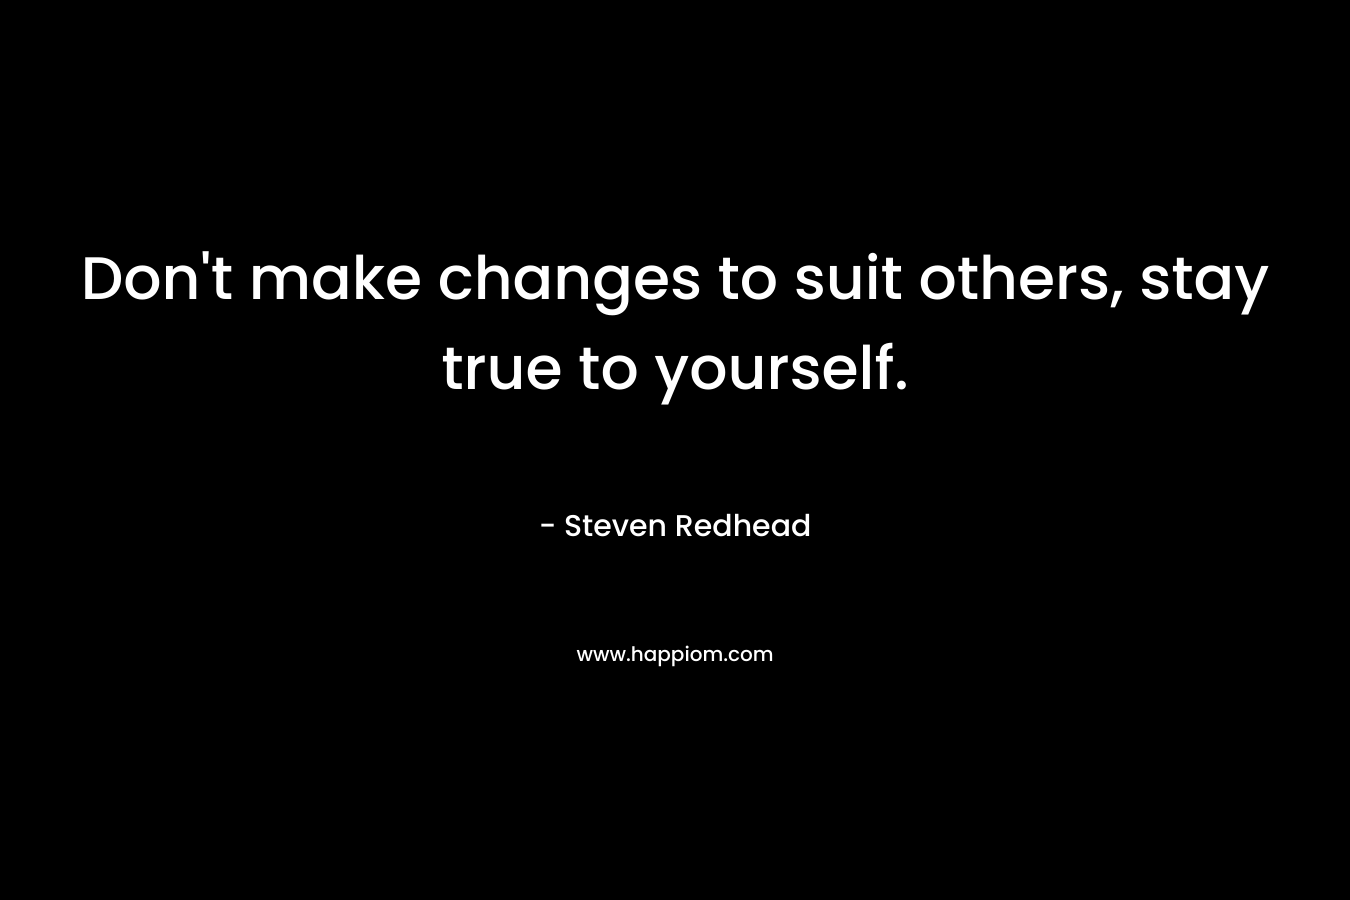 Don't make changes to suit others, stay true to yourself.